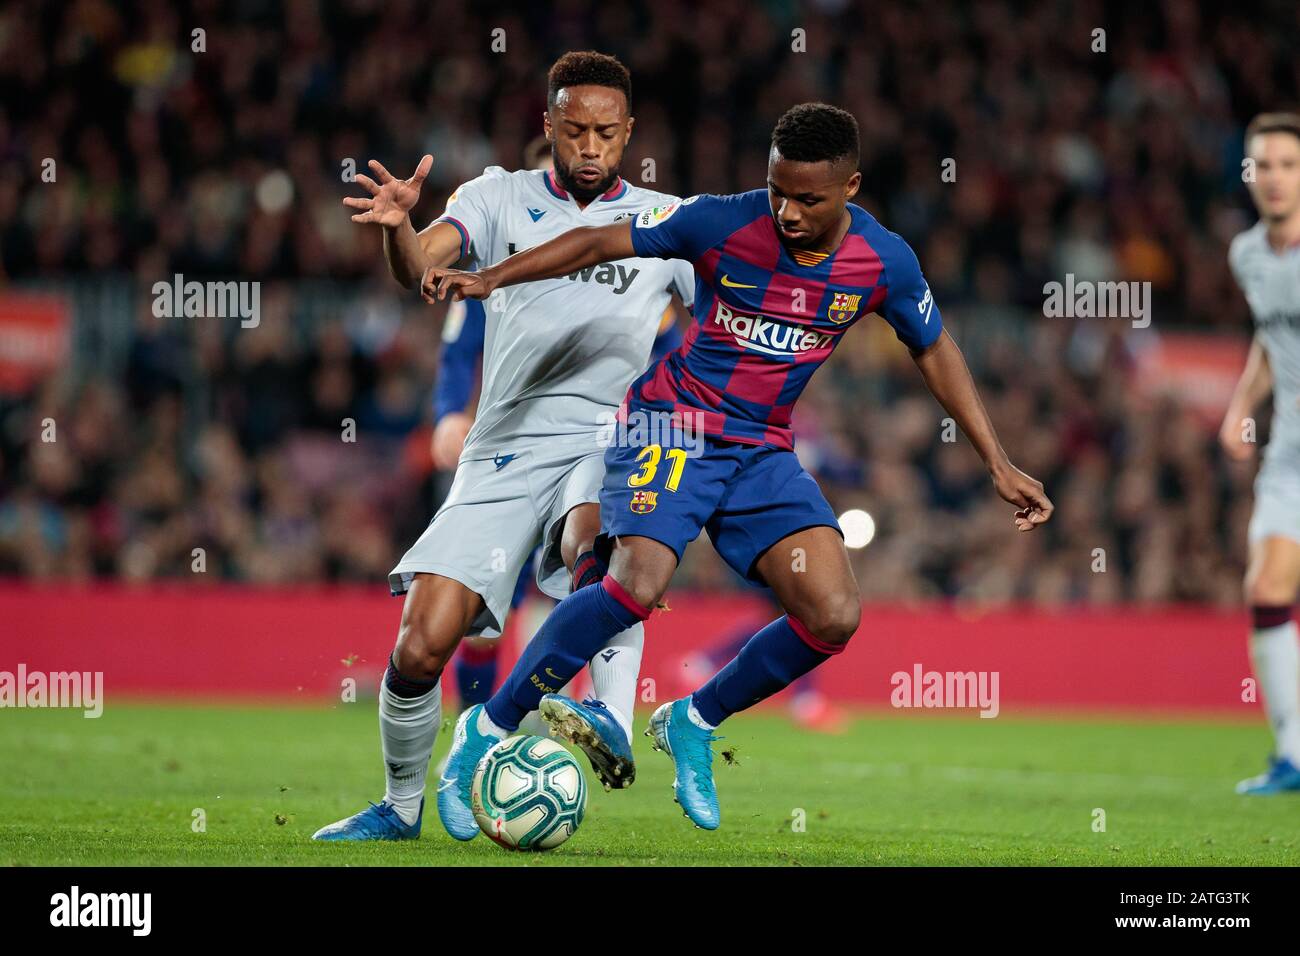 Barcelona, Spain. 02nd Feb, 2020. BARCELONA, SPAIN - FEBRUARY 02: Hernani of Levante UD fights a ball with Ansu Fati of FC Barcelona during the Liga match between FC Barcelona and Levante UD at Camp Nou on February 02, 2020 in Barcelona, Spain. Credit: Dax Images/Alamy Live News Stock Photo